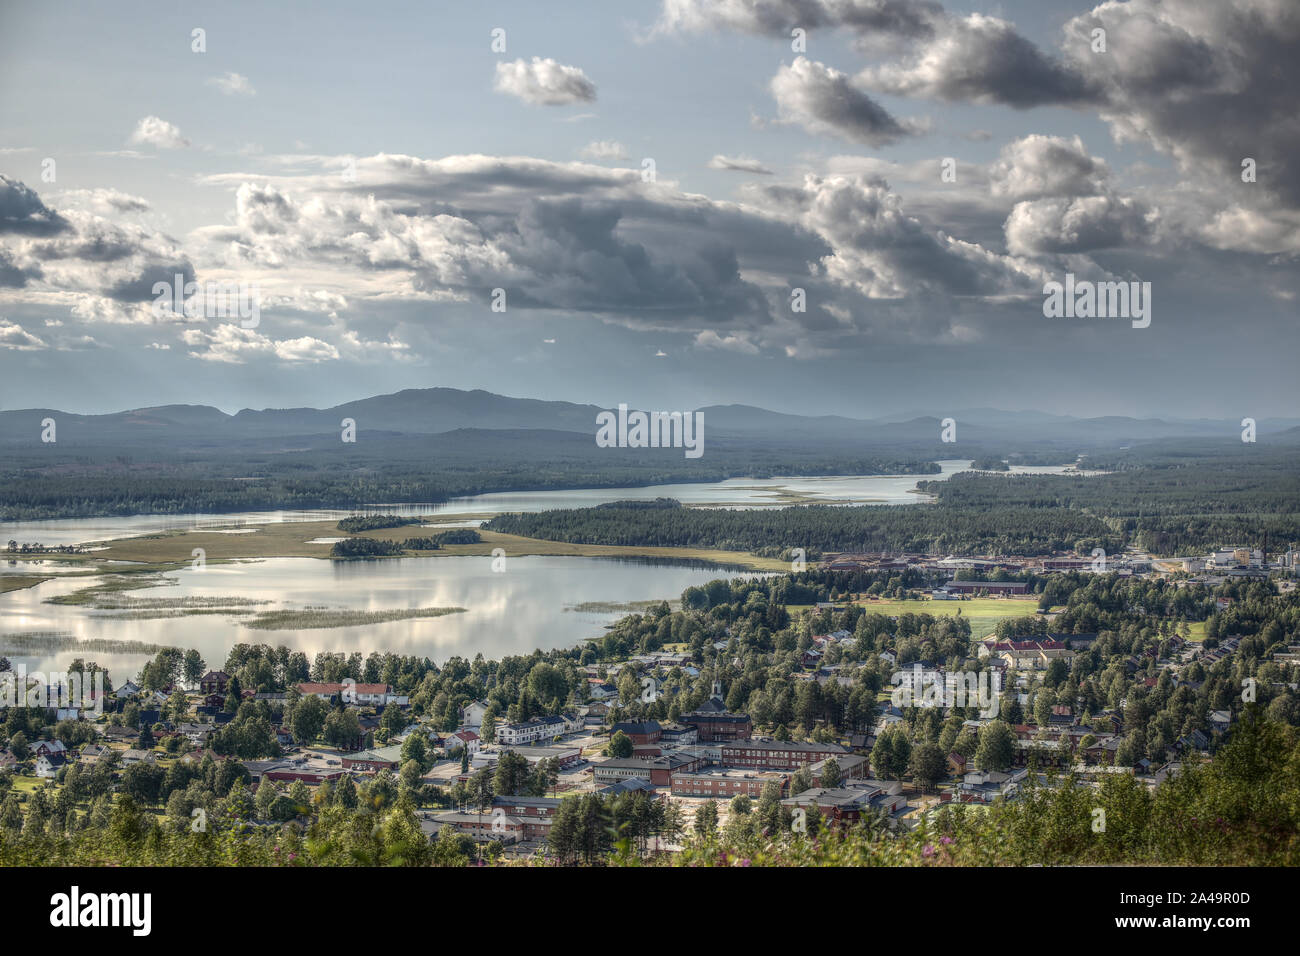 Tonemapped view on the town of Mala in Northern Sweden. Stock Photo